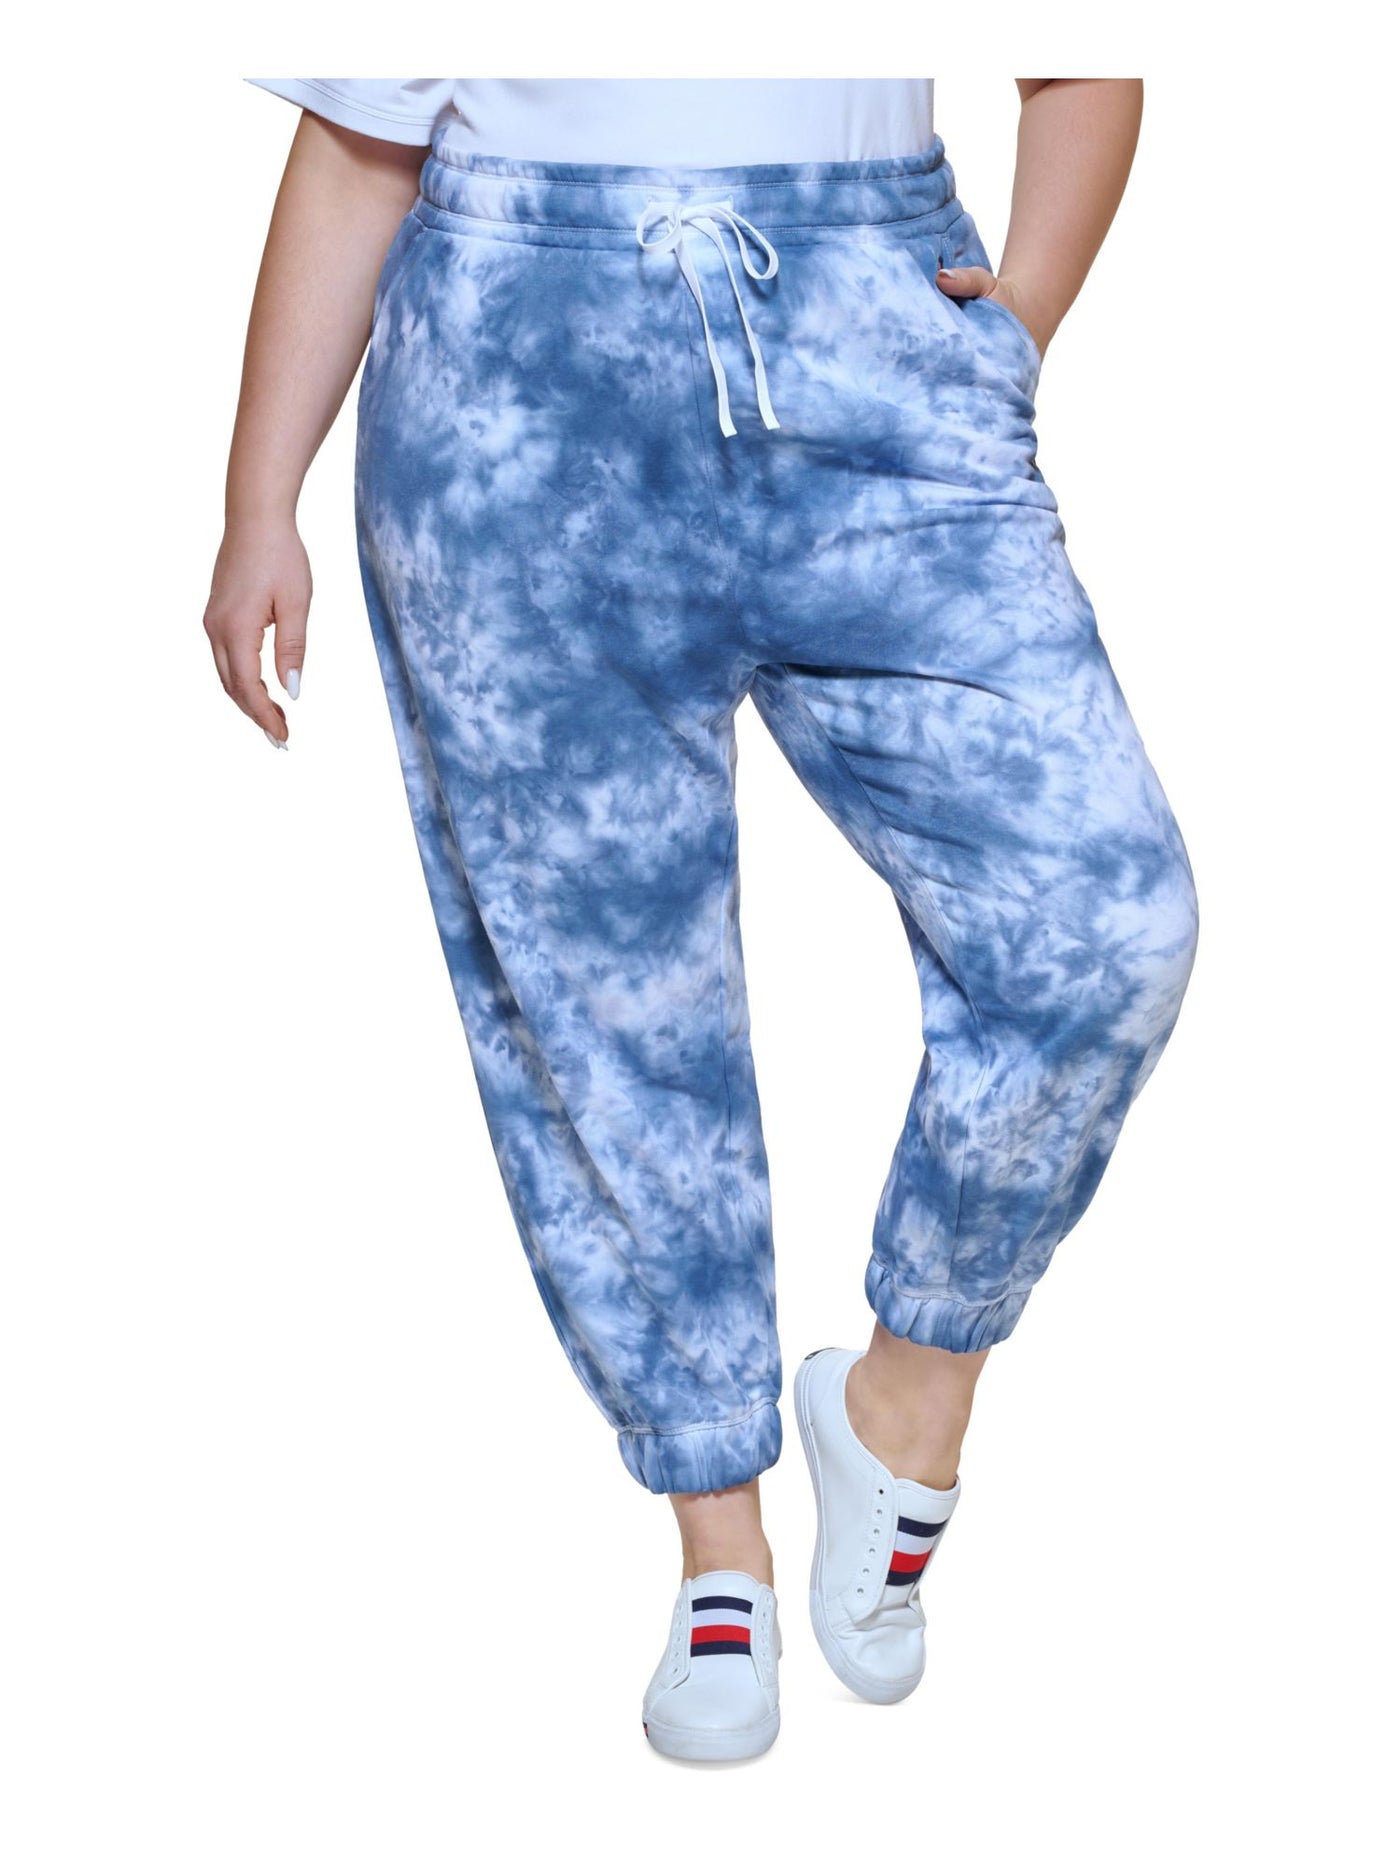 TOMMY HILFIGER SPORT Womens Blue Pocketed Tie Relaxed Fit Elastic Cuffs Jogger Tie Dye High Waist Pants Plus 0X